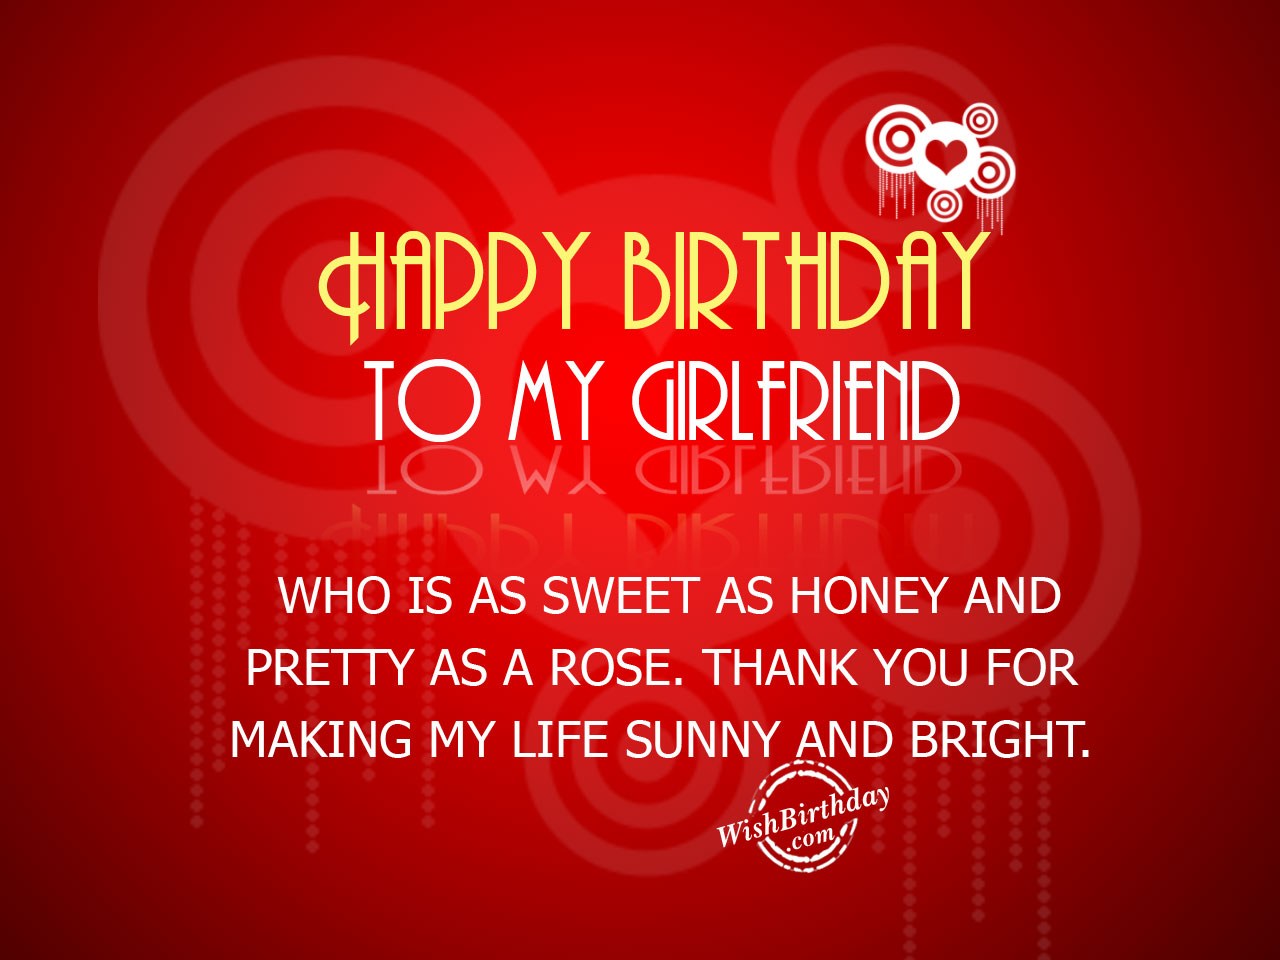 Birthday Wishes For Girlfriend Birthday Images, Pictures